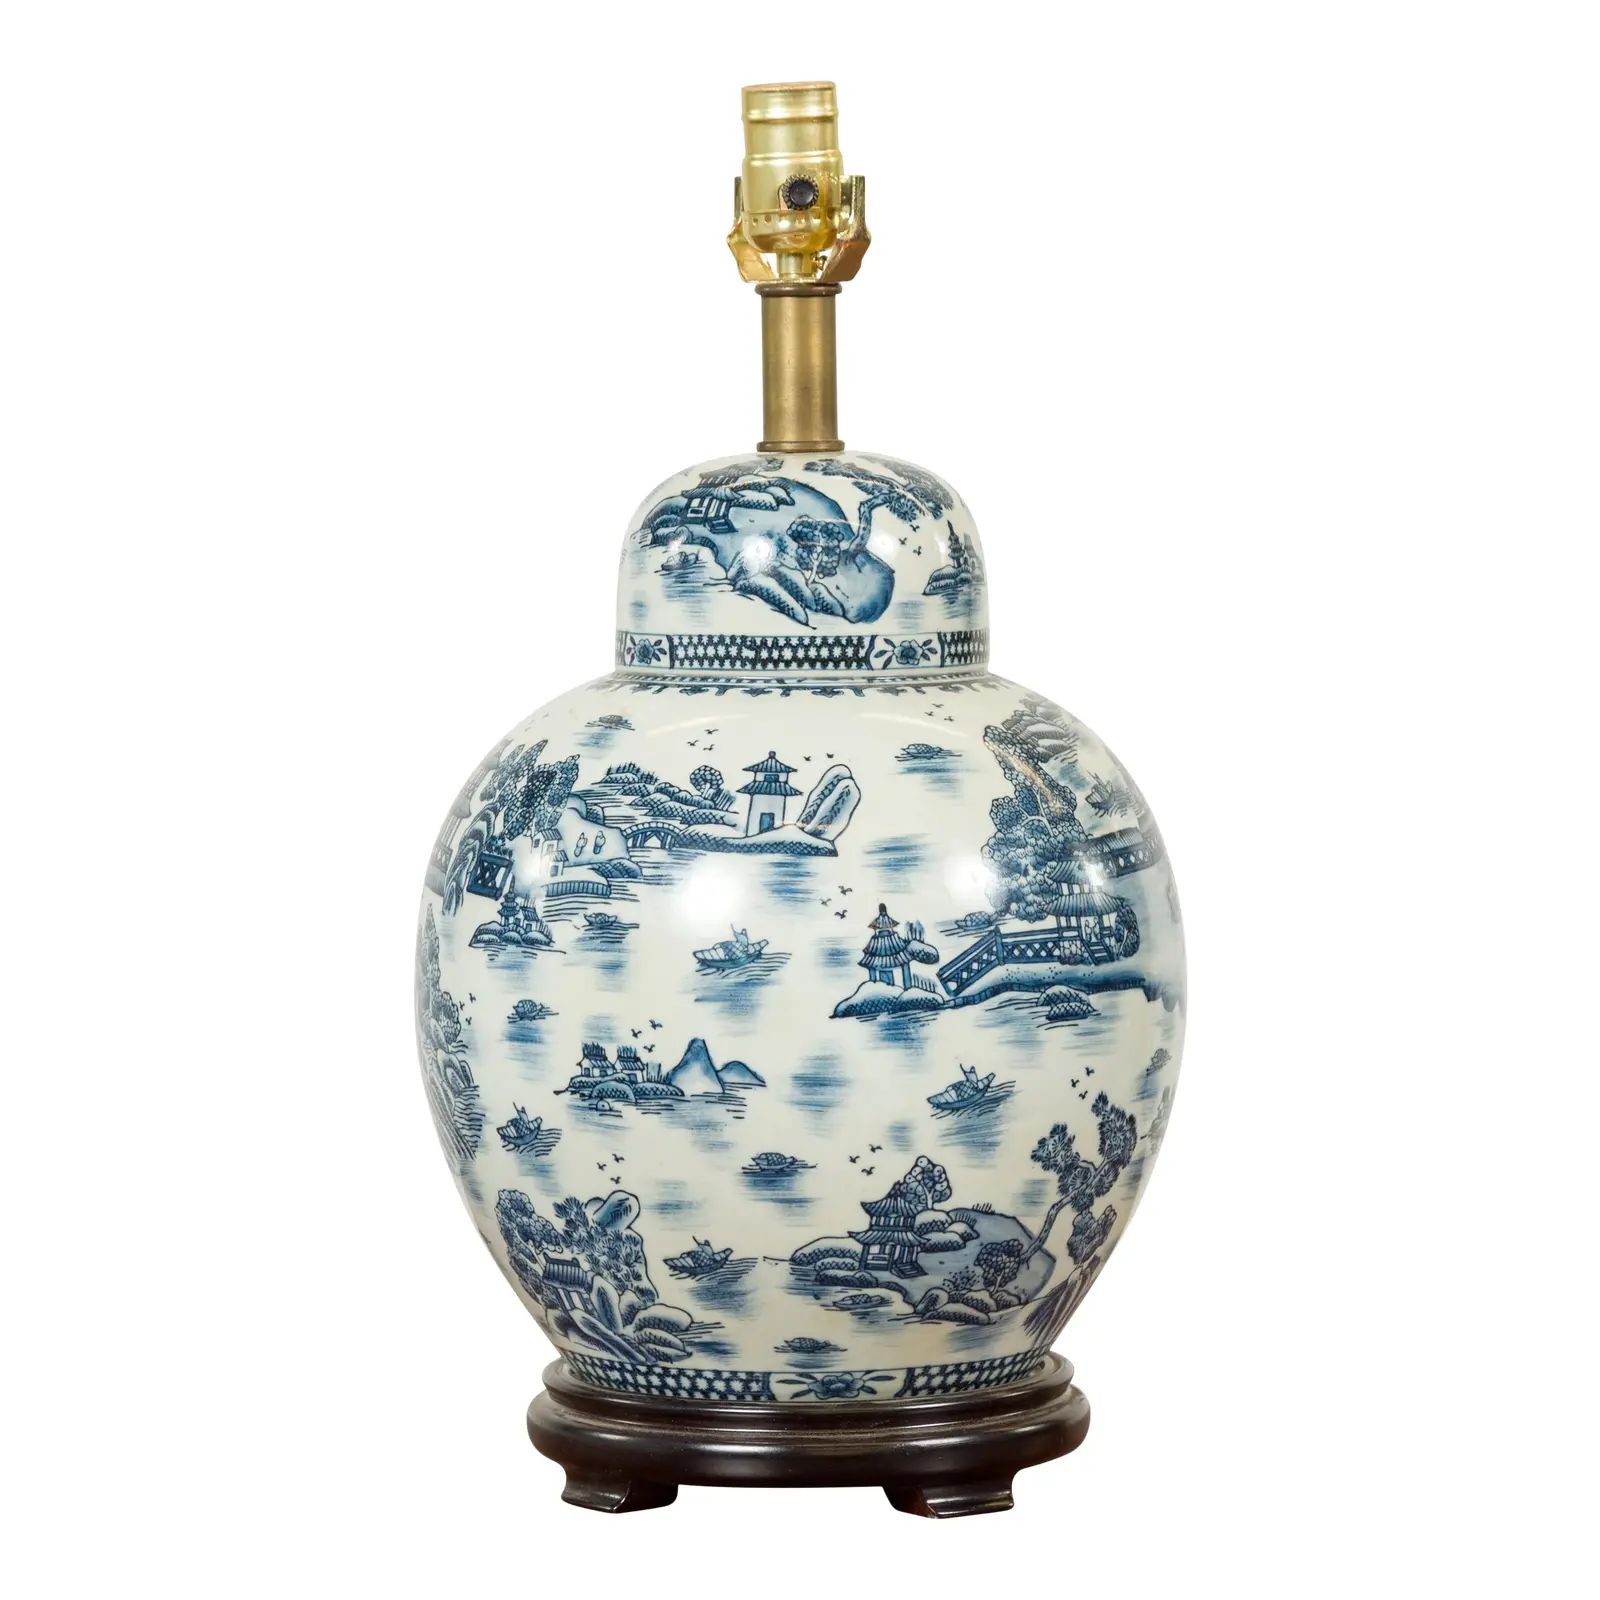 Mid 20th Century Vintage Chinese Blue and white Porcelain Lamp with Architectures and Landscapes | Chairish